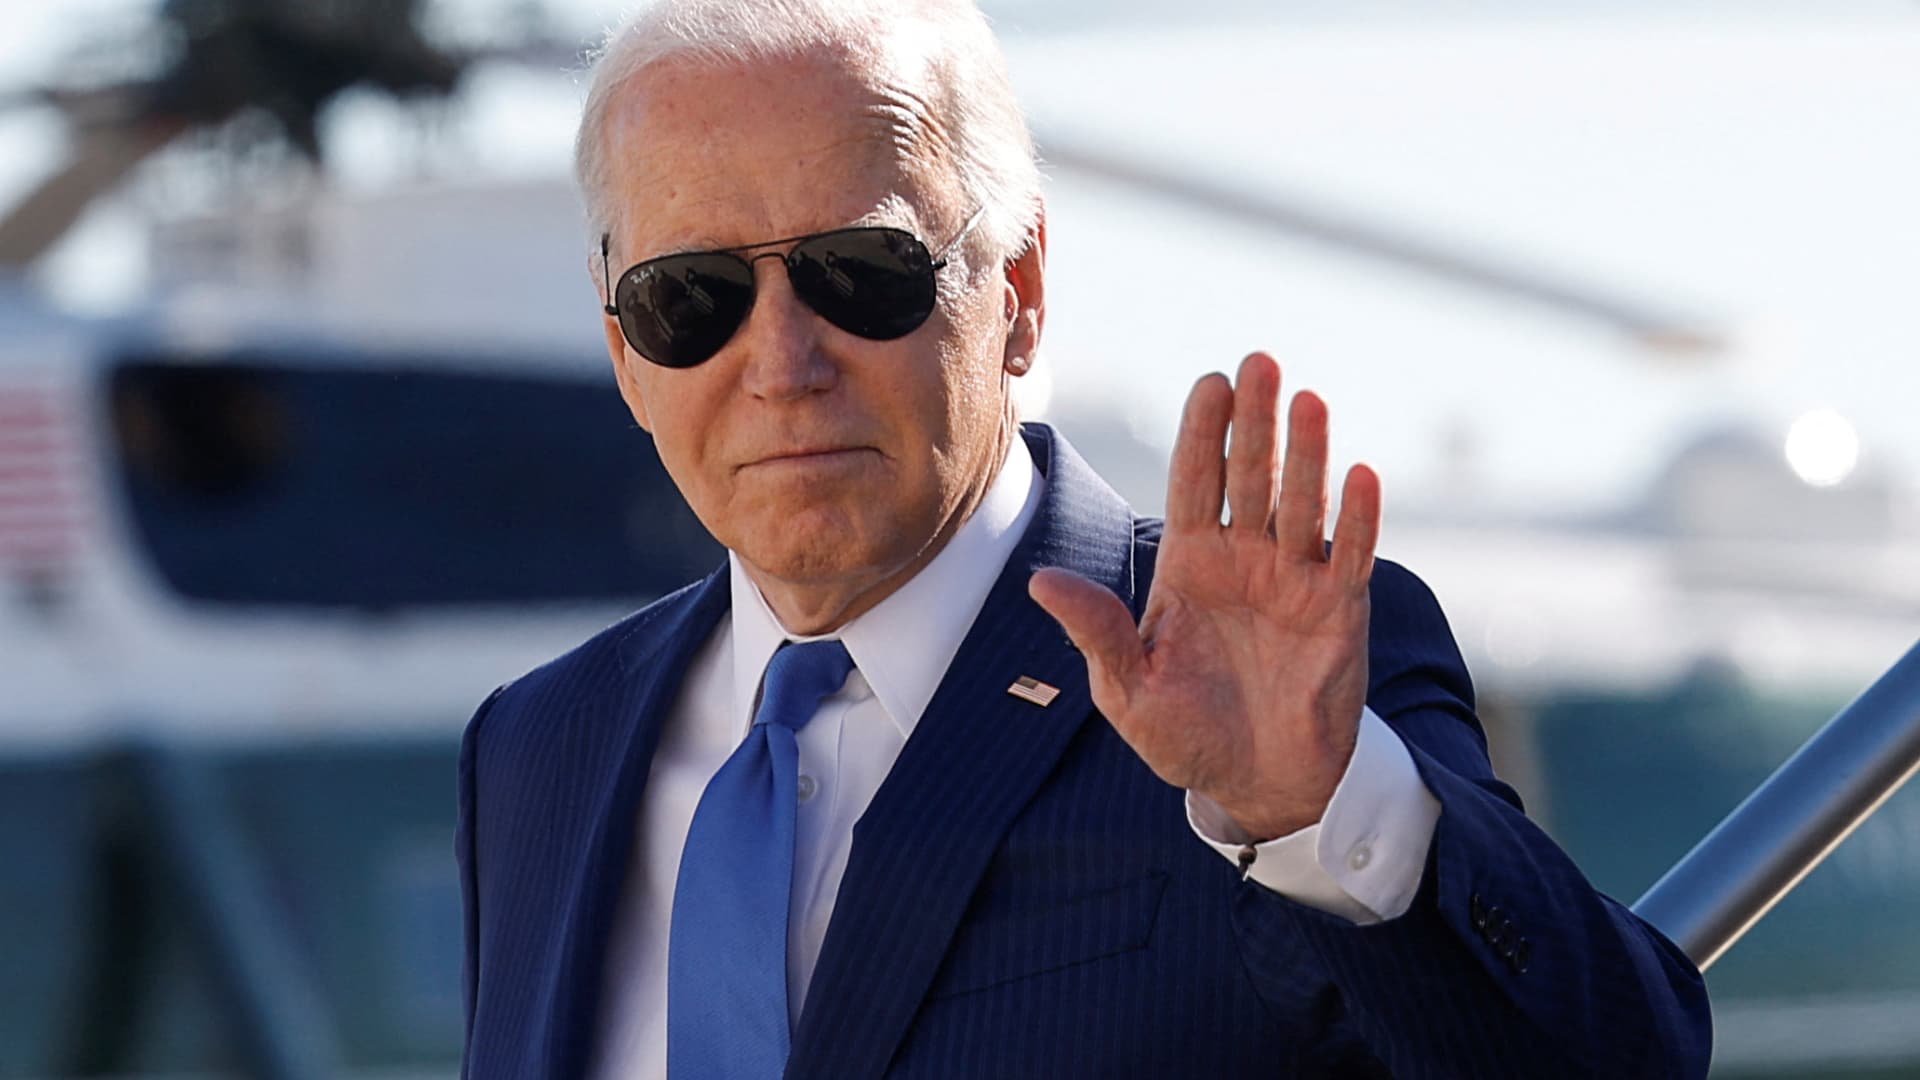 Biden campaign debuts official TikTookay account, but app is still banned on most government devices